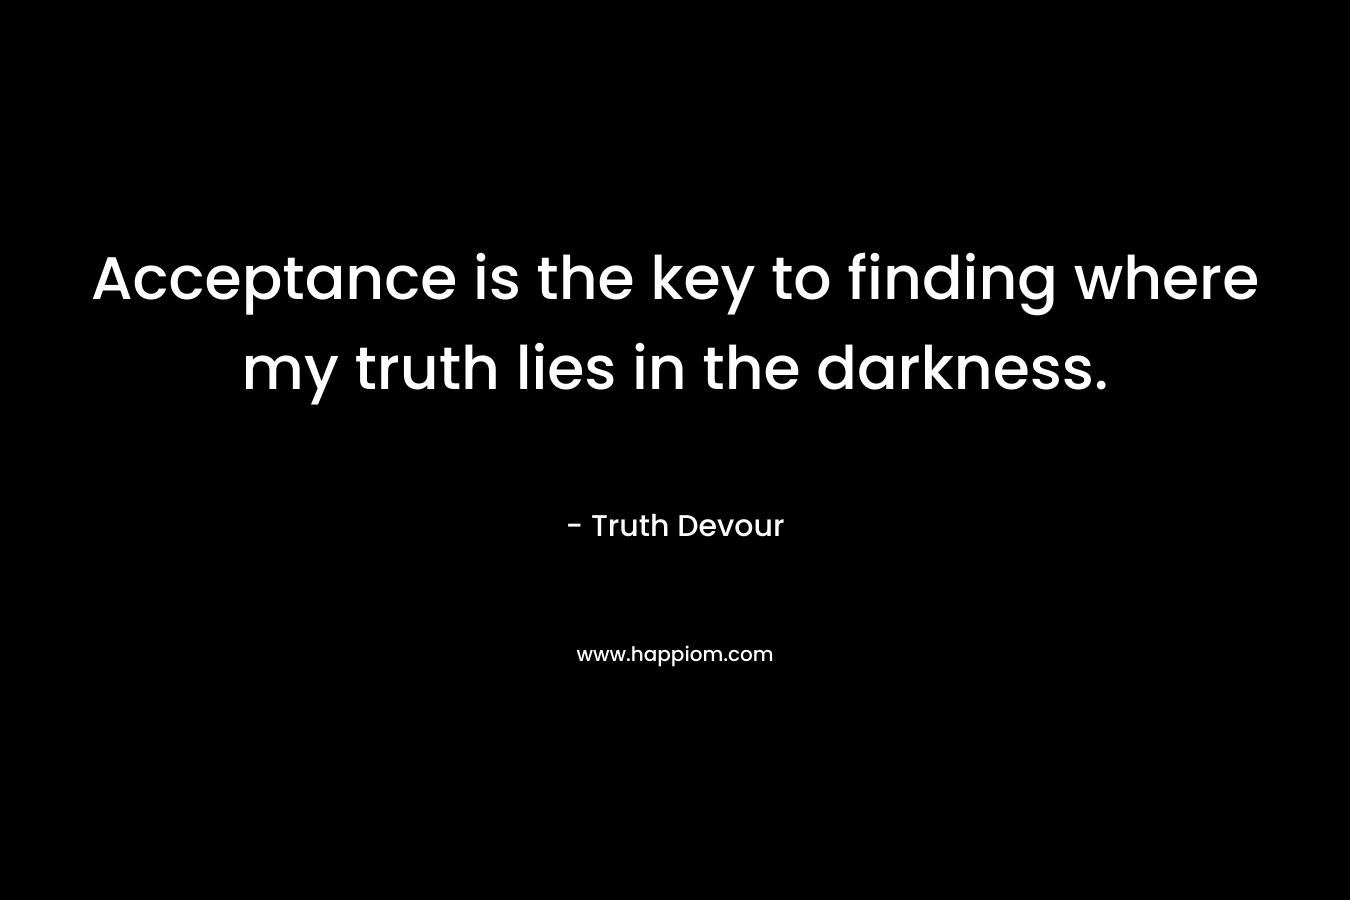 Acceptance is the key to finding where my truth lies in the darkness.